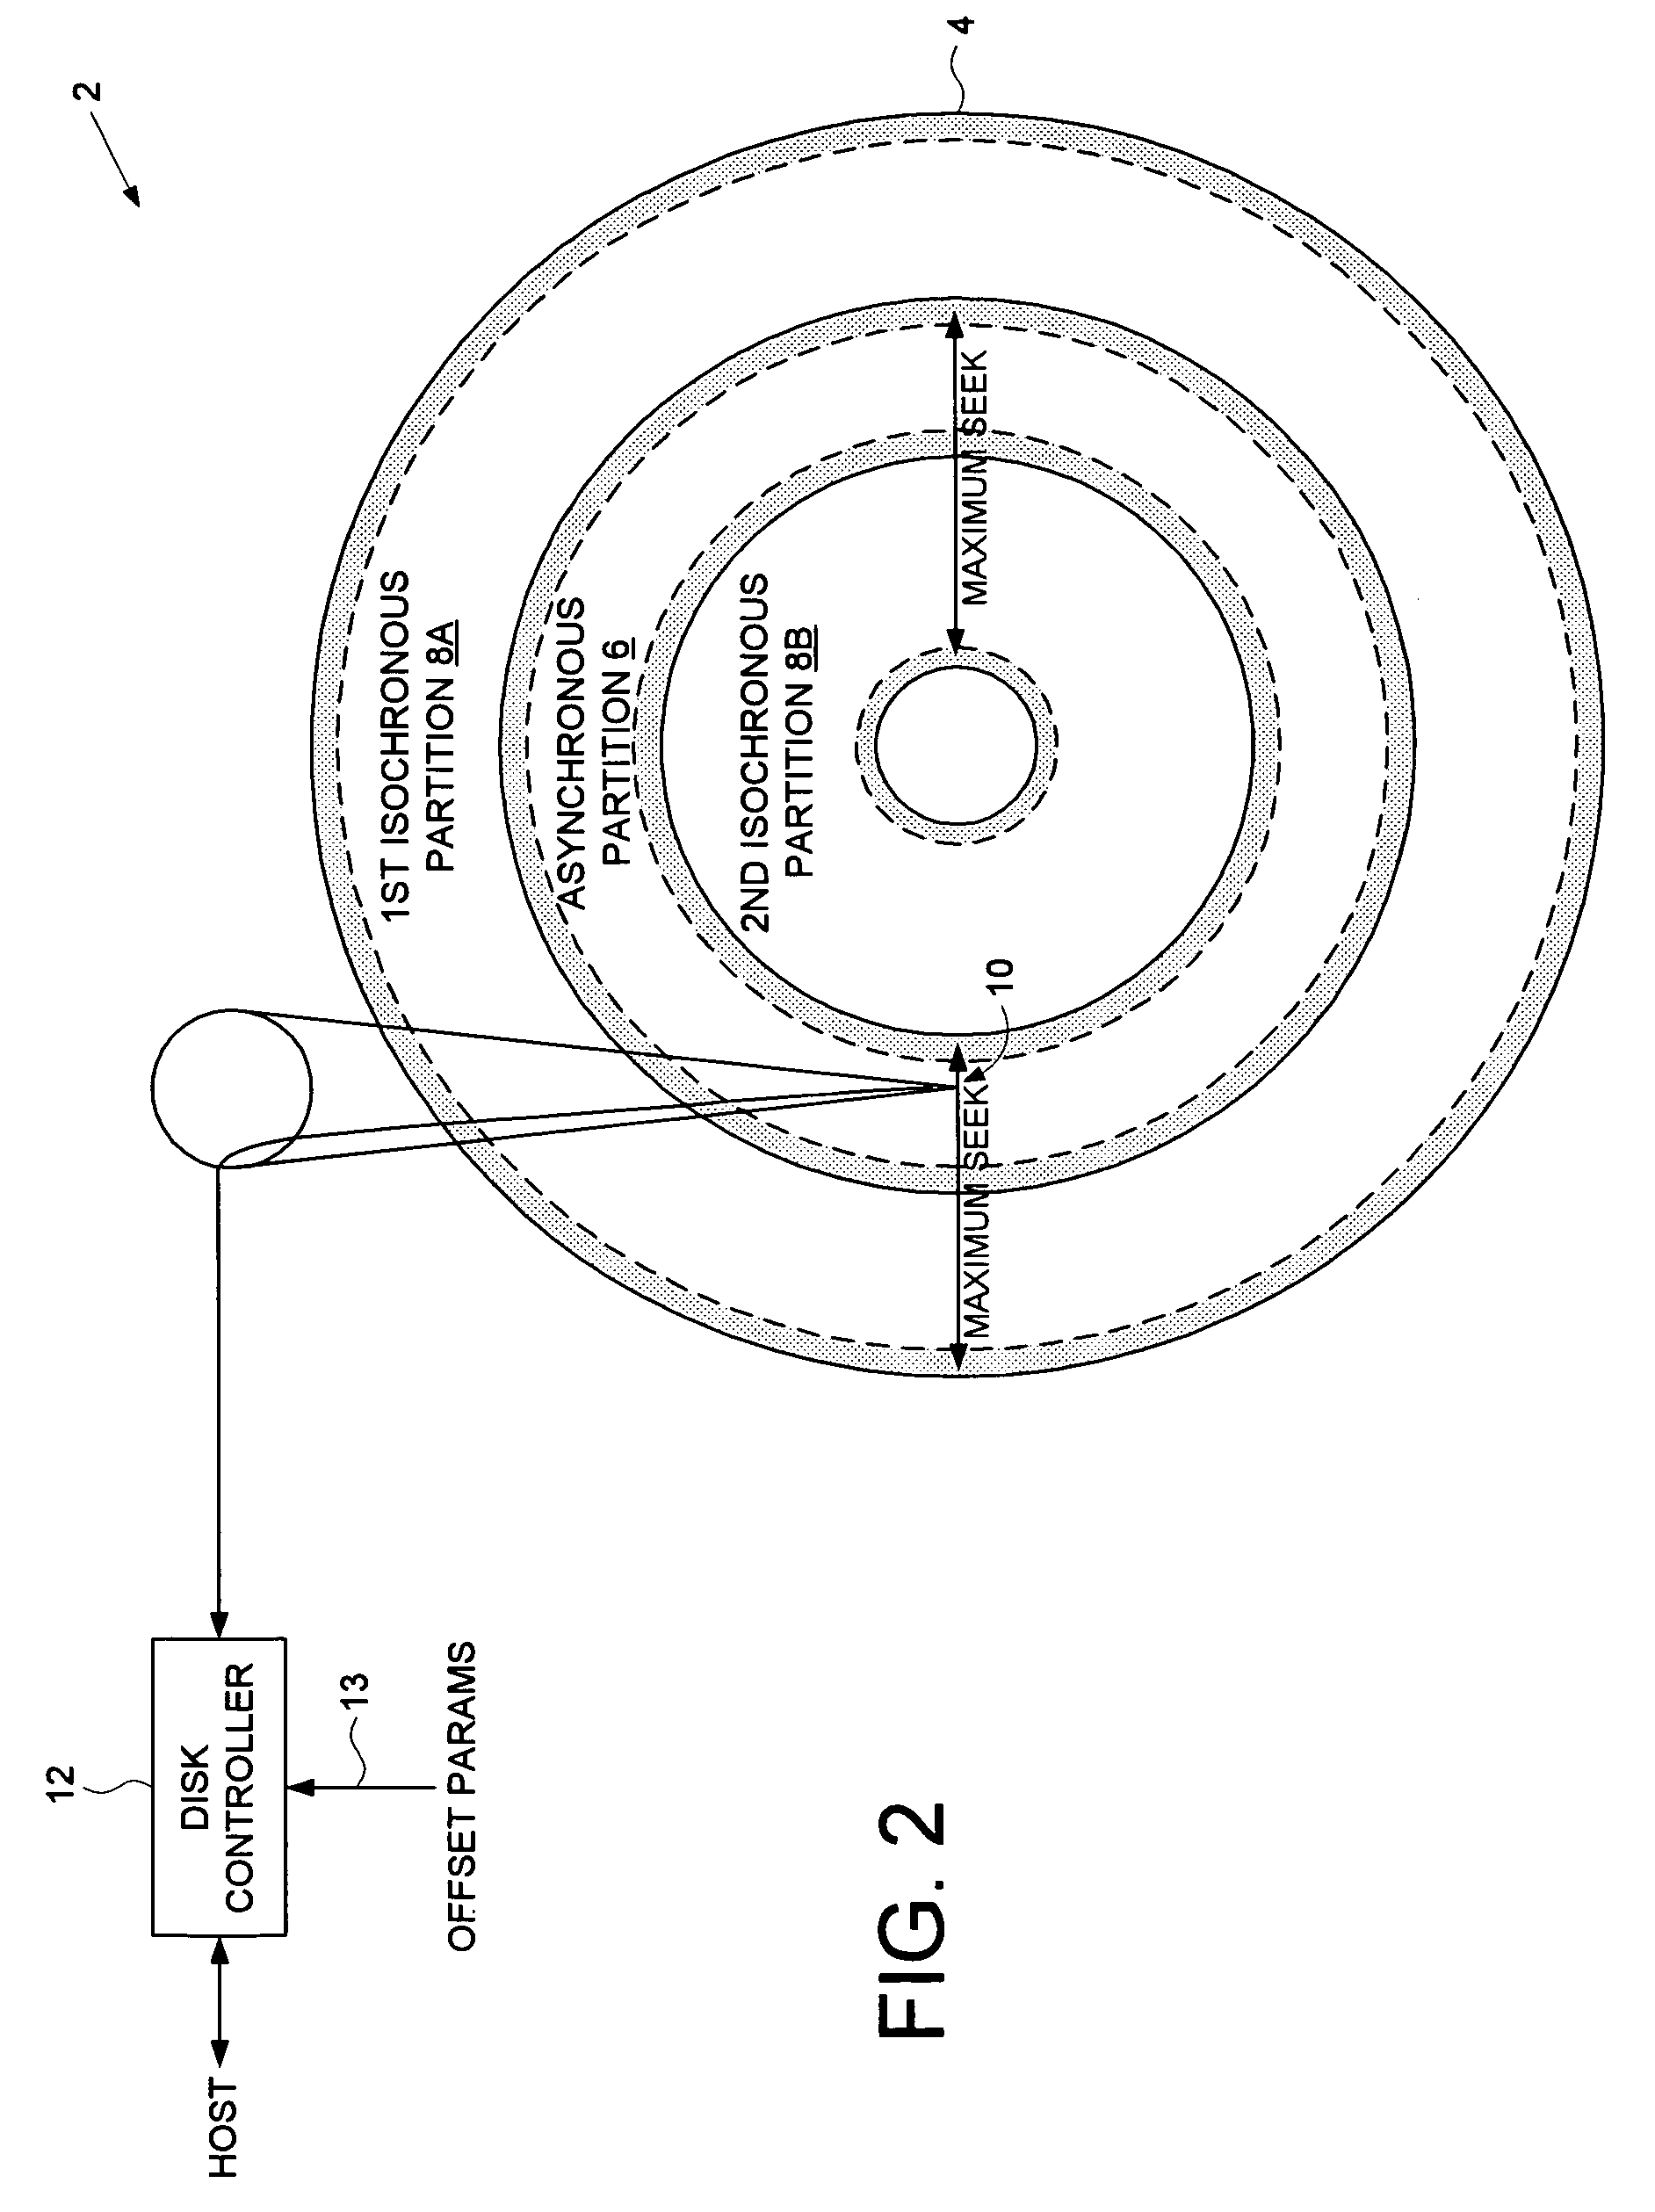 Disk drive comprising an asynchronous partition located on a disk between two isochronous partitions